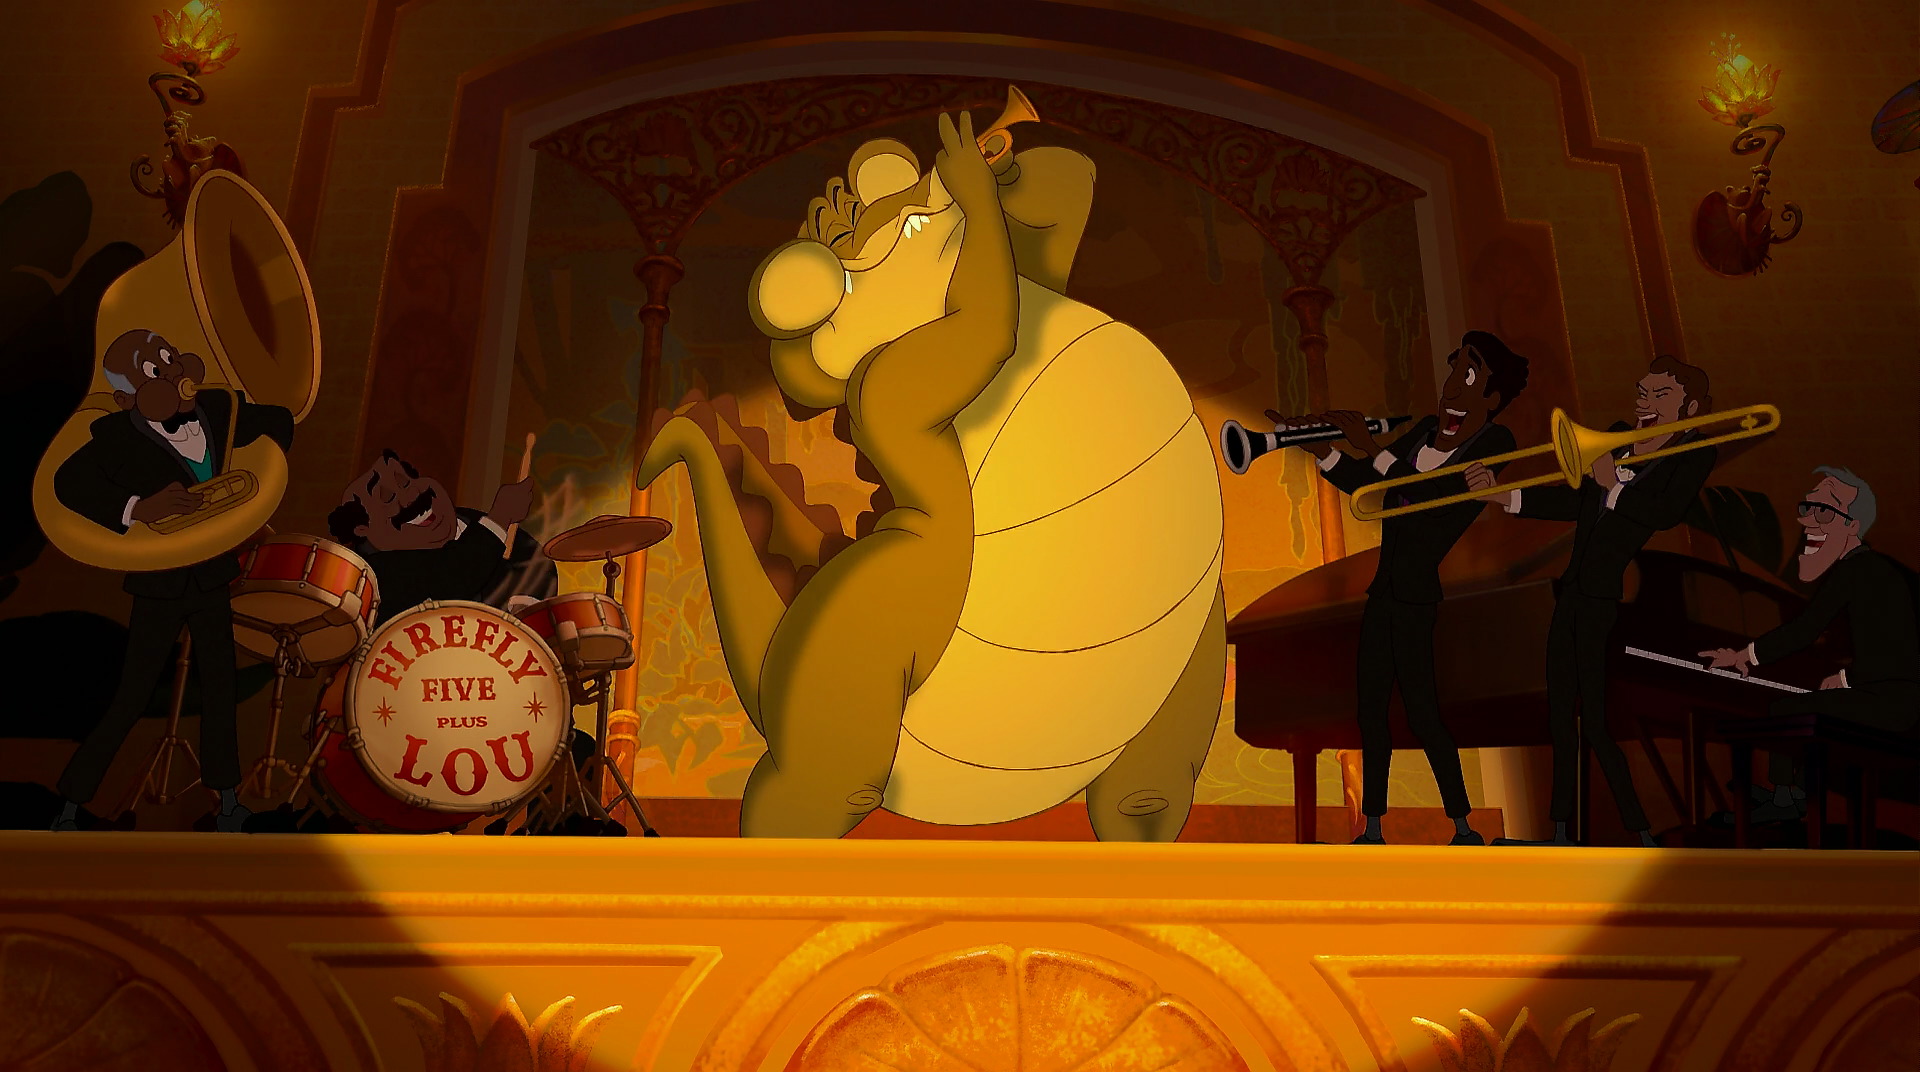 Louis the Alligator (The Princess and the Frog)